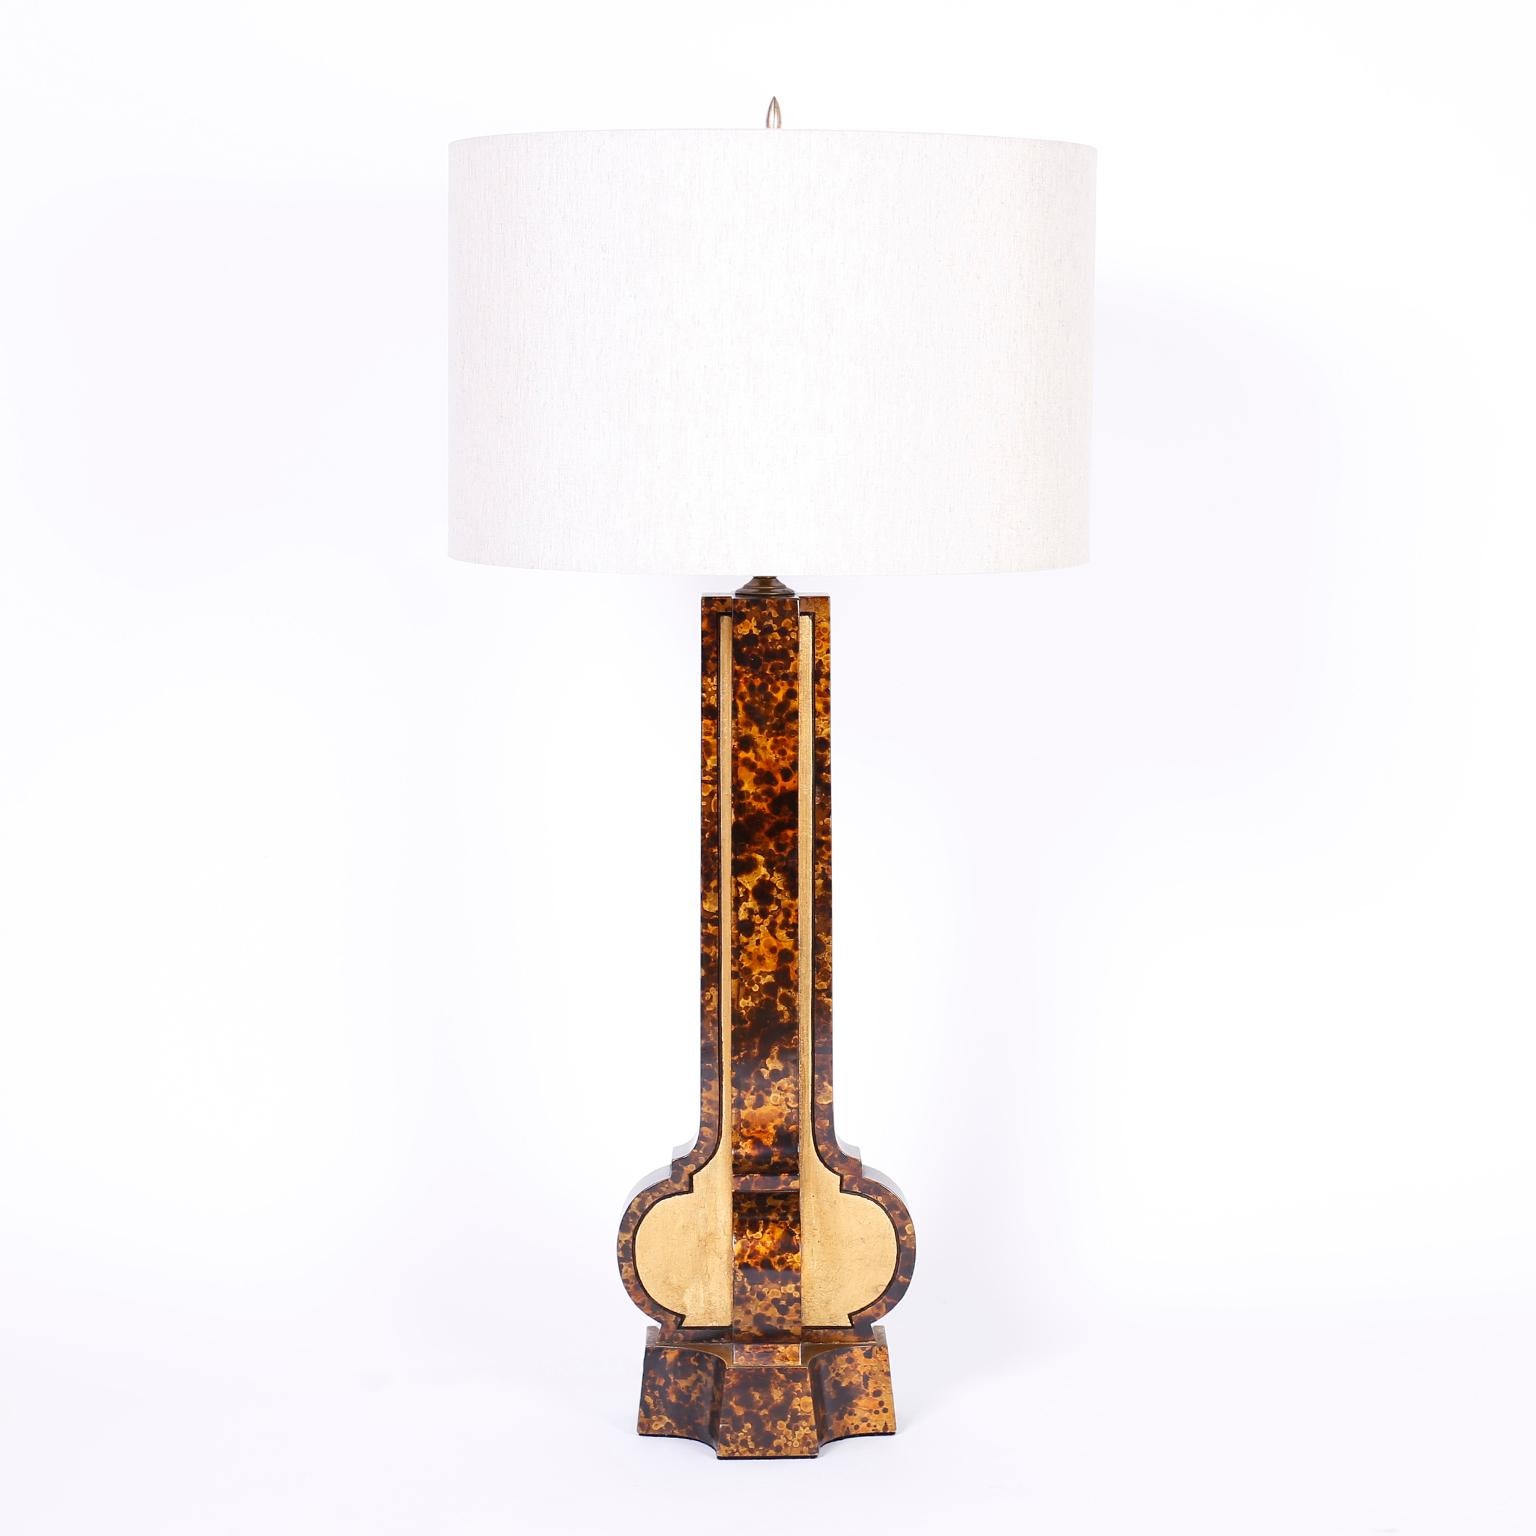 Pair of midcentury table lamps with a modern stylized classic form, crafted in wood with a faux tortoise lacquer technique separated by panels of gold leaf.